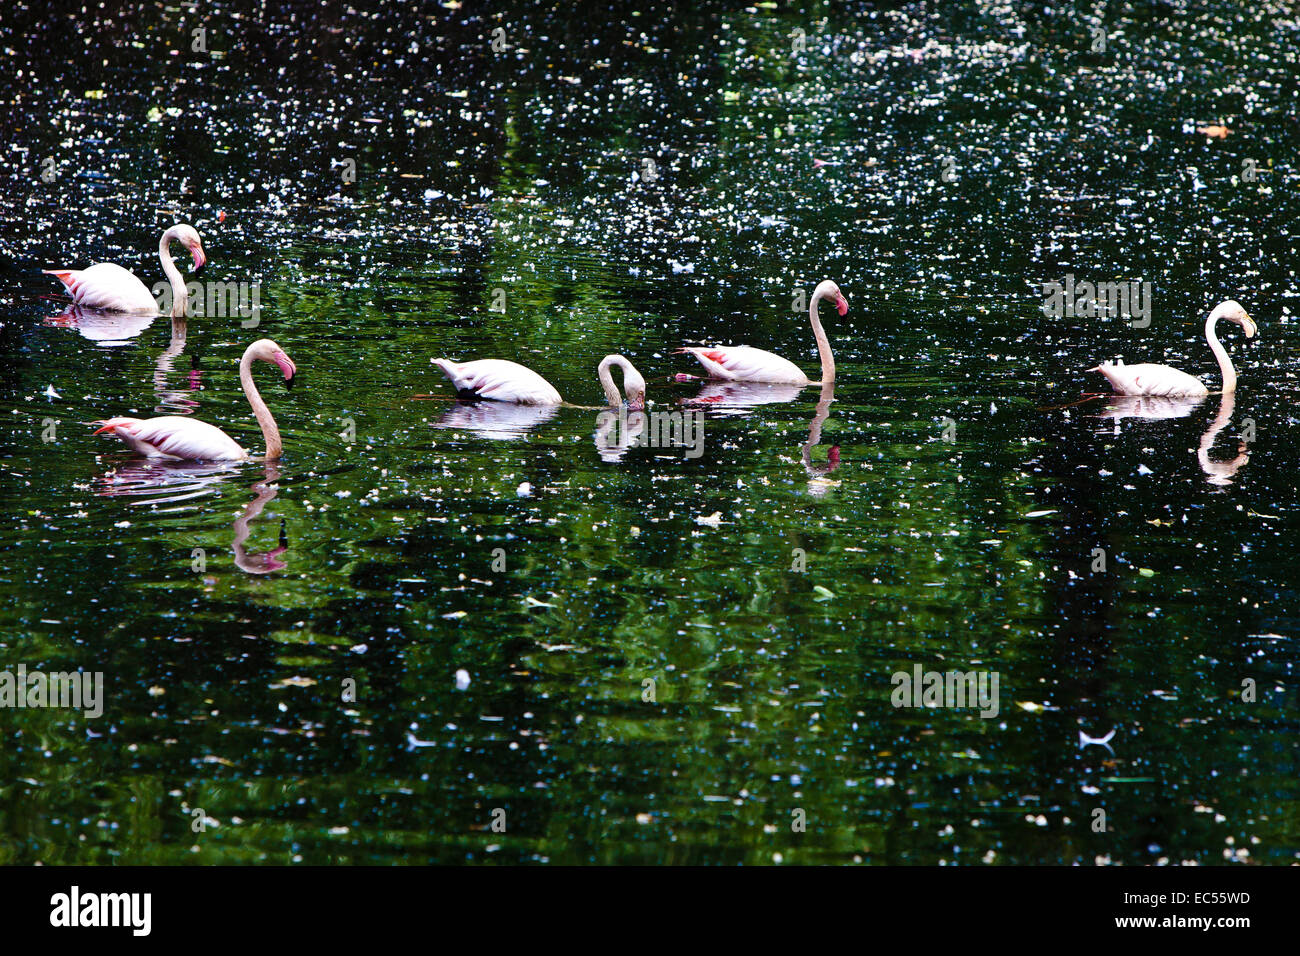 five flamingos (flamingoes) swim on a dark green lake in the forest Stock Photo